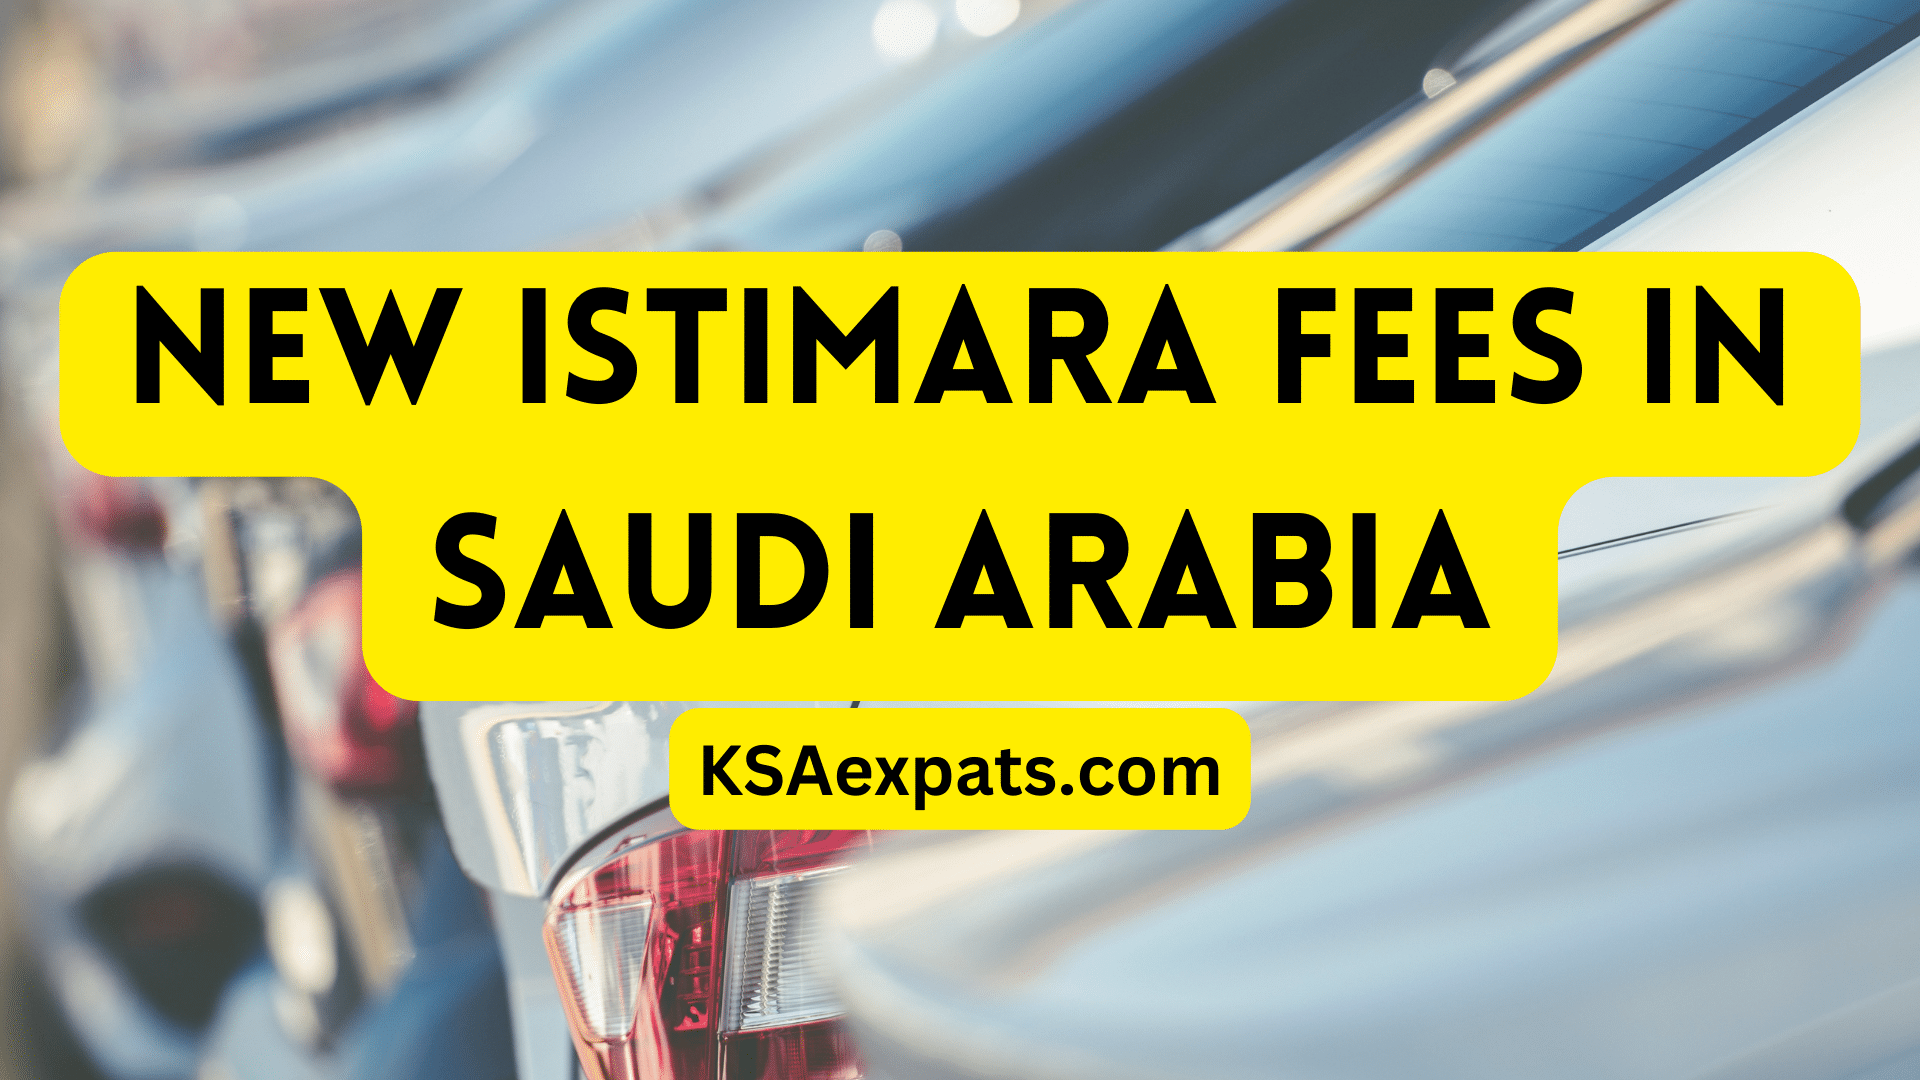 New Istimara Fees in Saudi Arabia: All You Need to Know